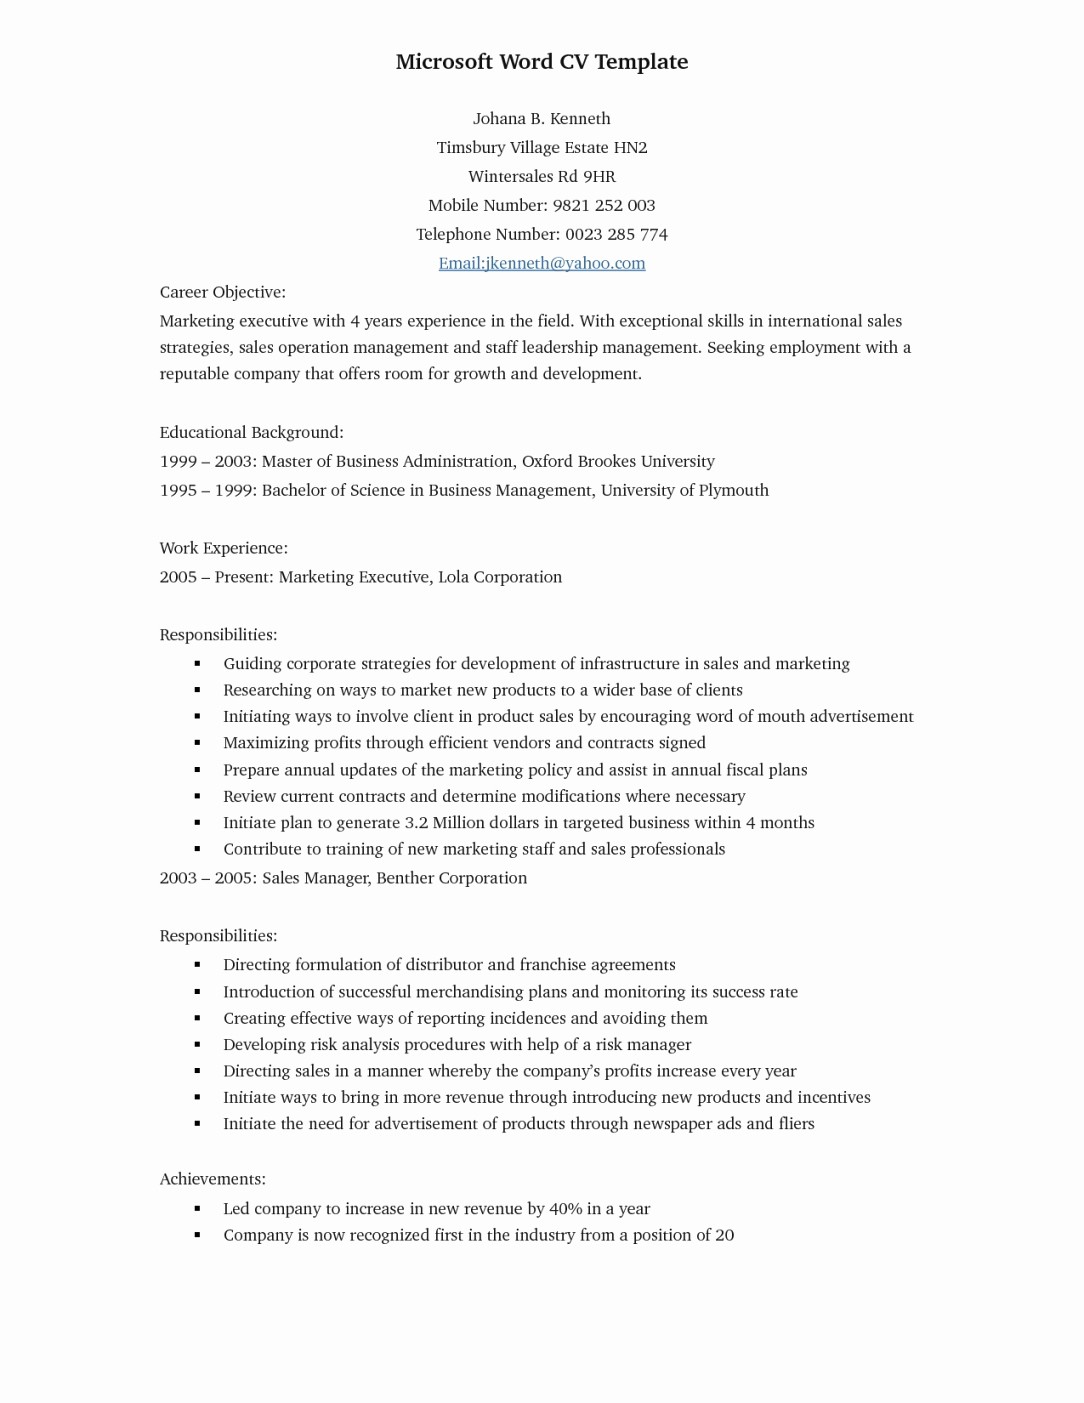 Ms Office Word Resume Templates Best Of Resume Template Microsoft Word 2017